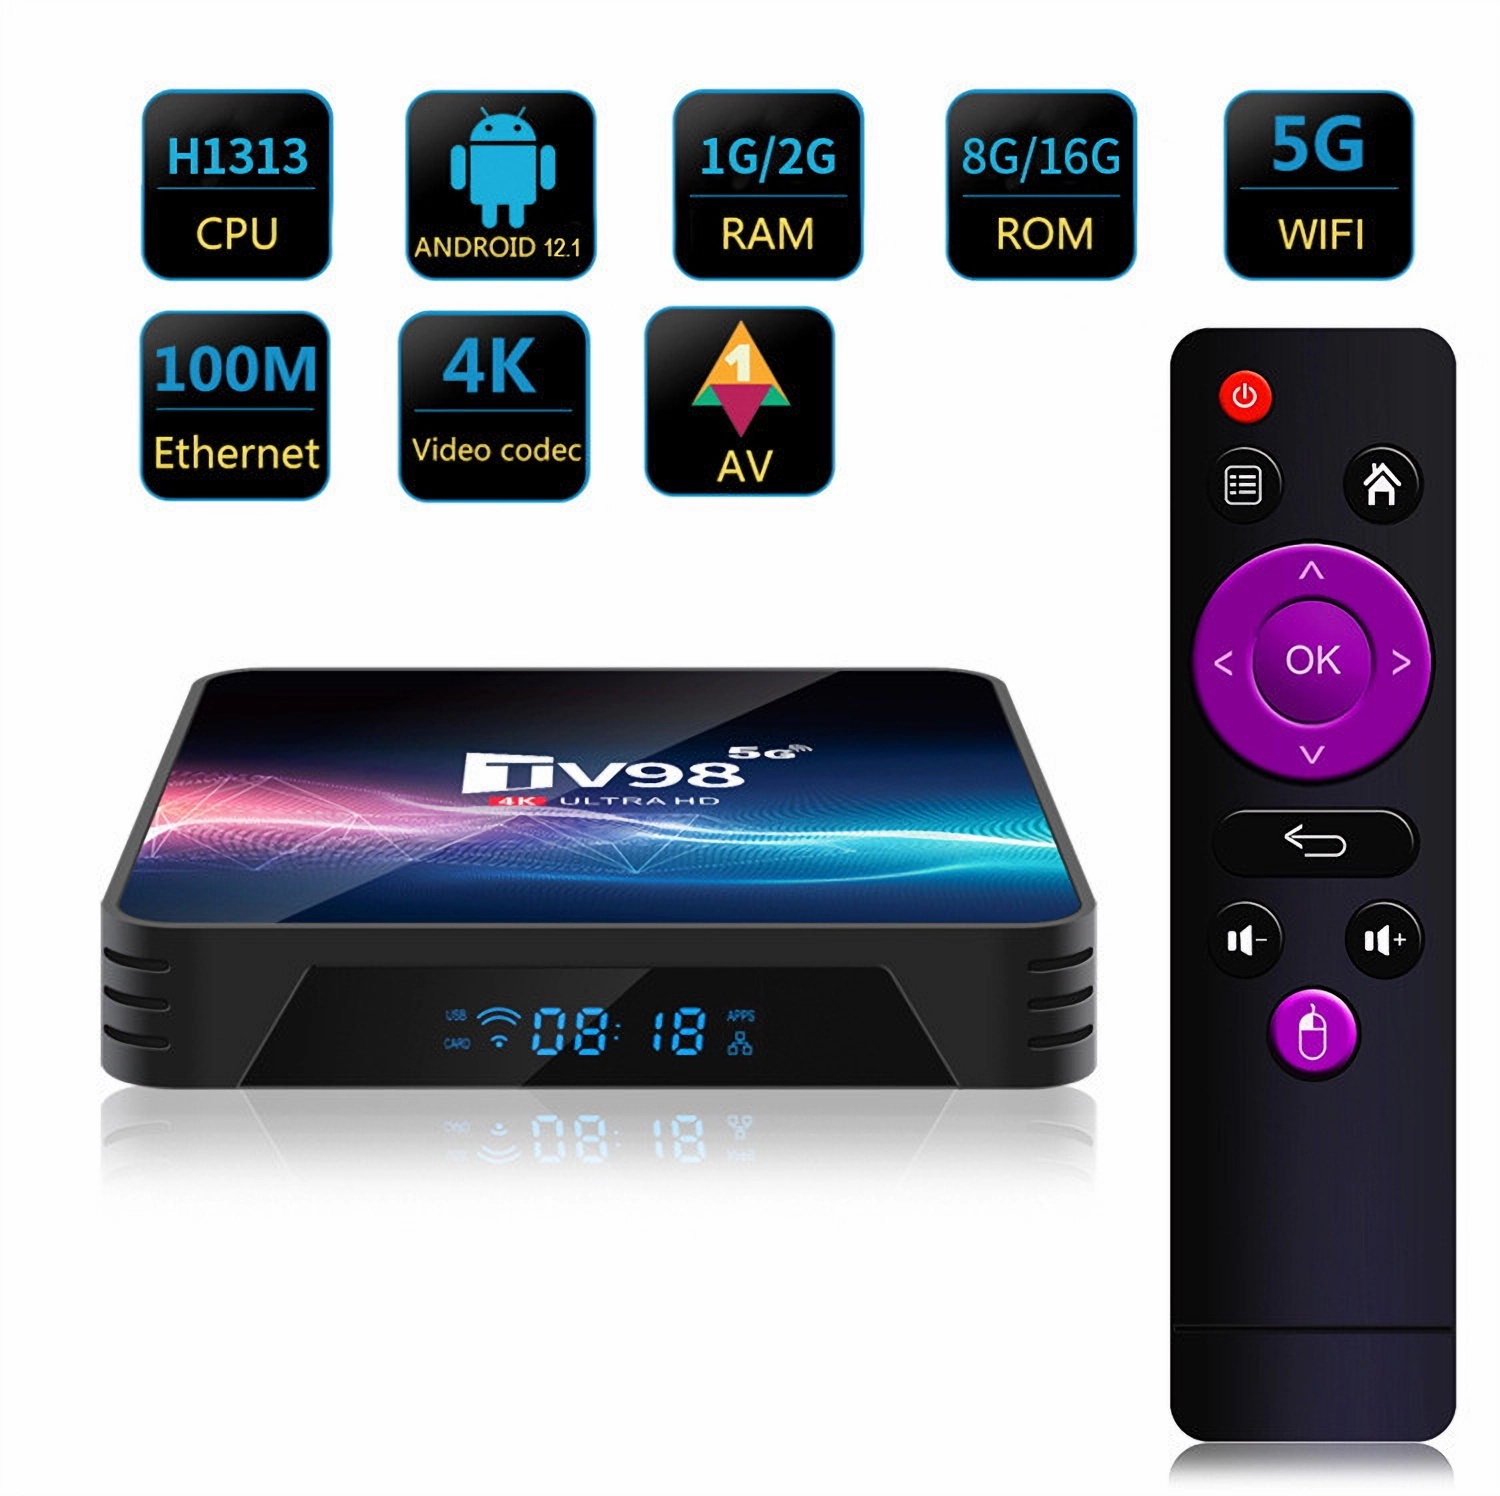 BRIGHTAKE Ultimative 4K Dual-Band Android - WiFi, TV Box 2GB+16GB Android TV Box